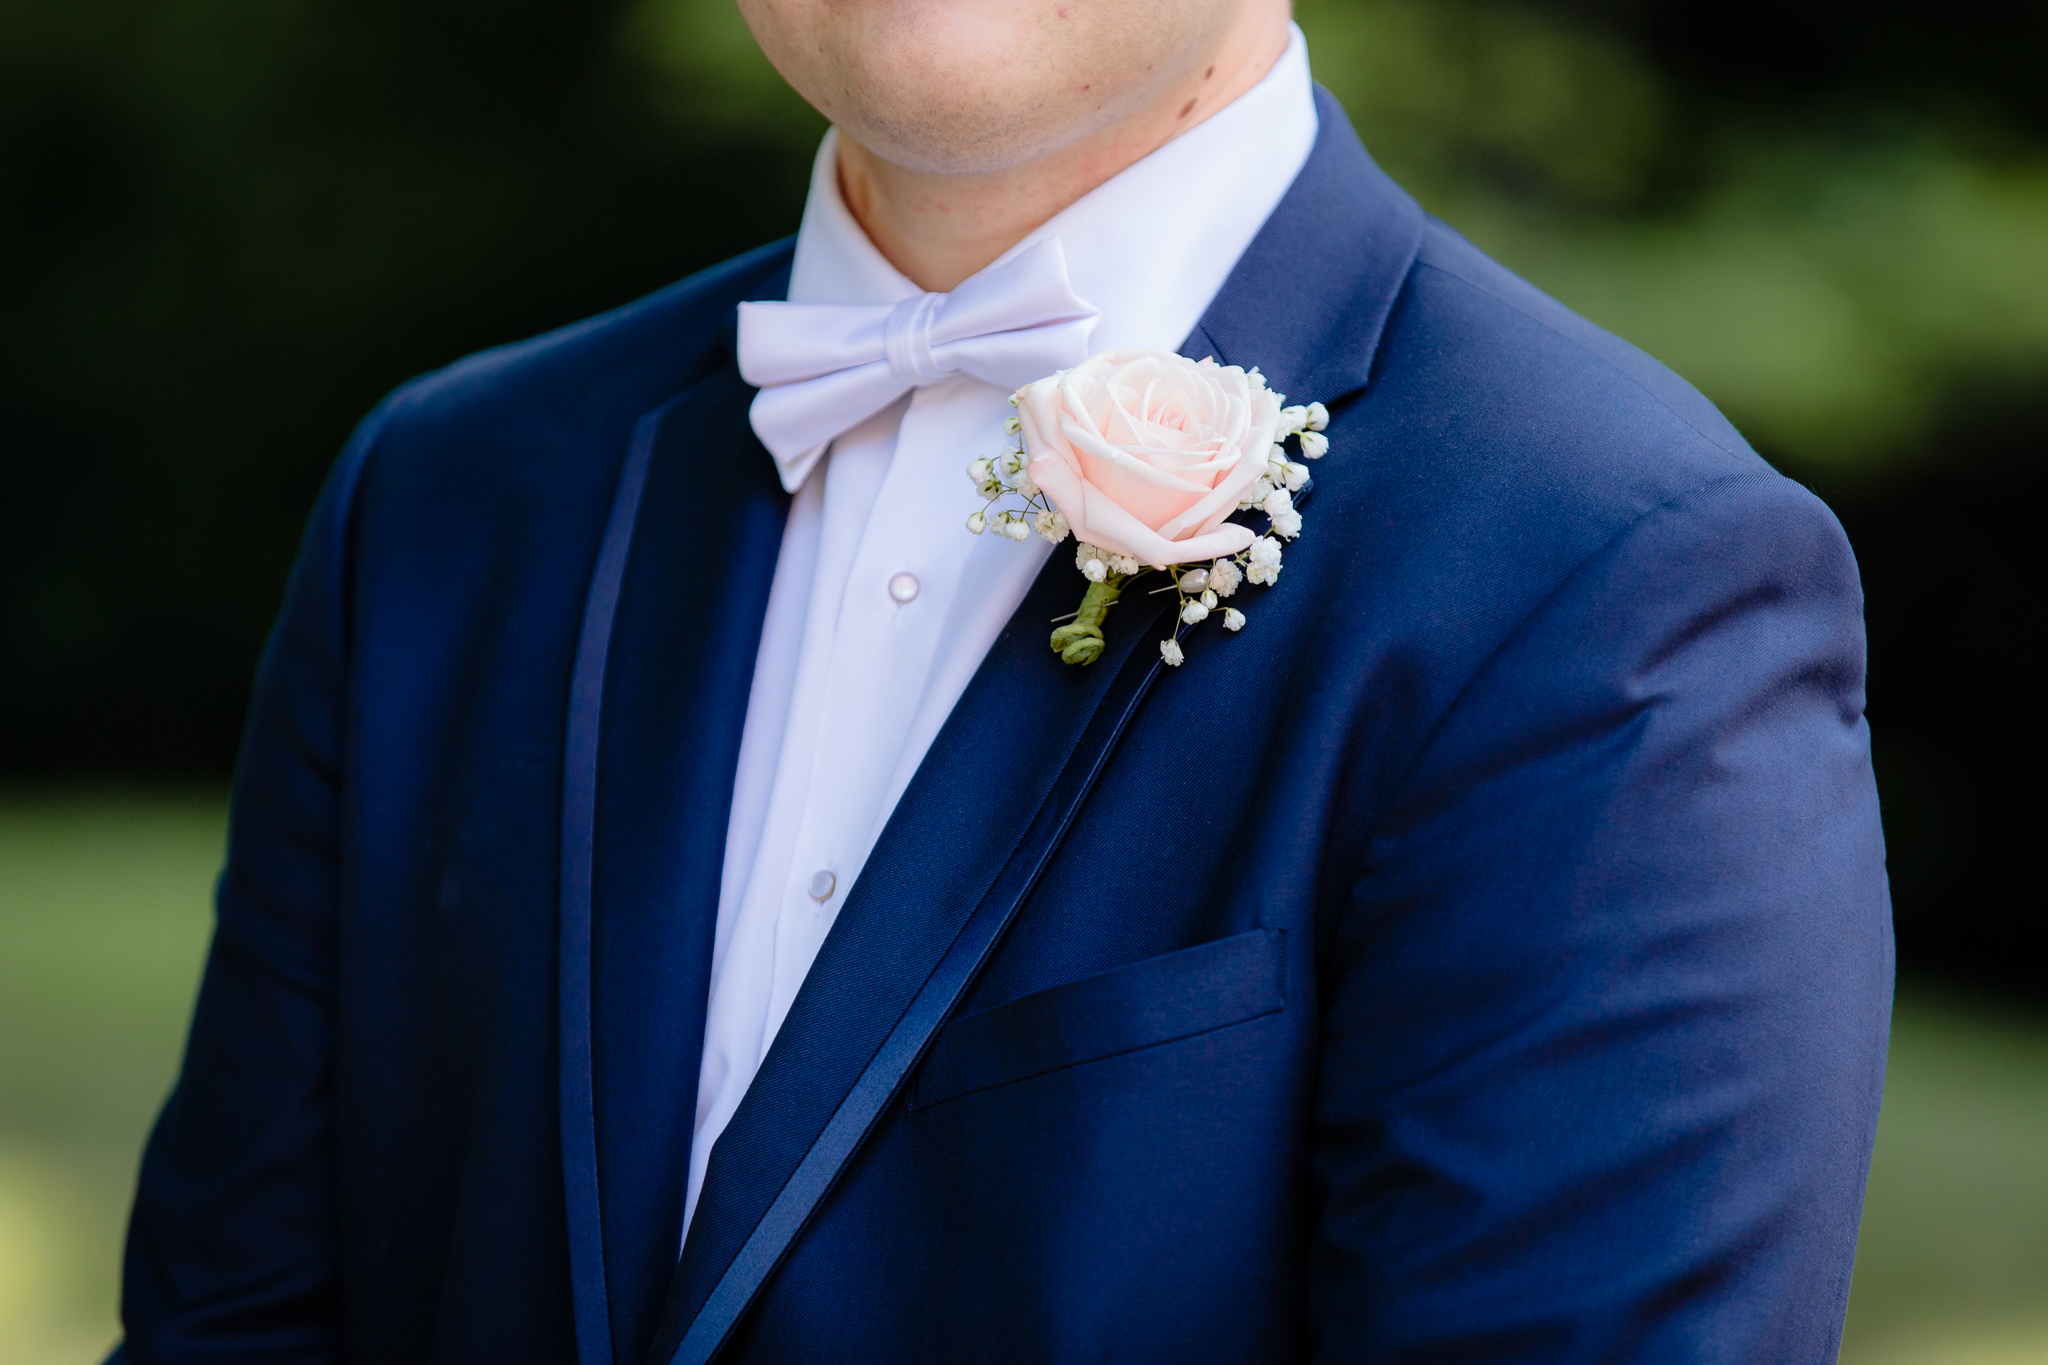 Groom's rose boutonniere by Fields of Heather at Duquesne University